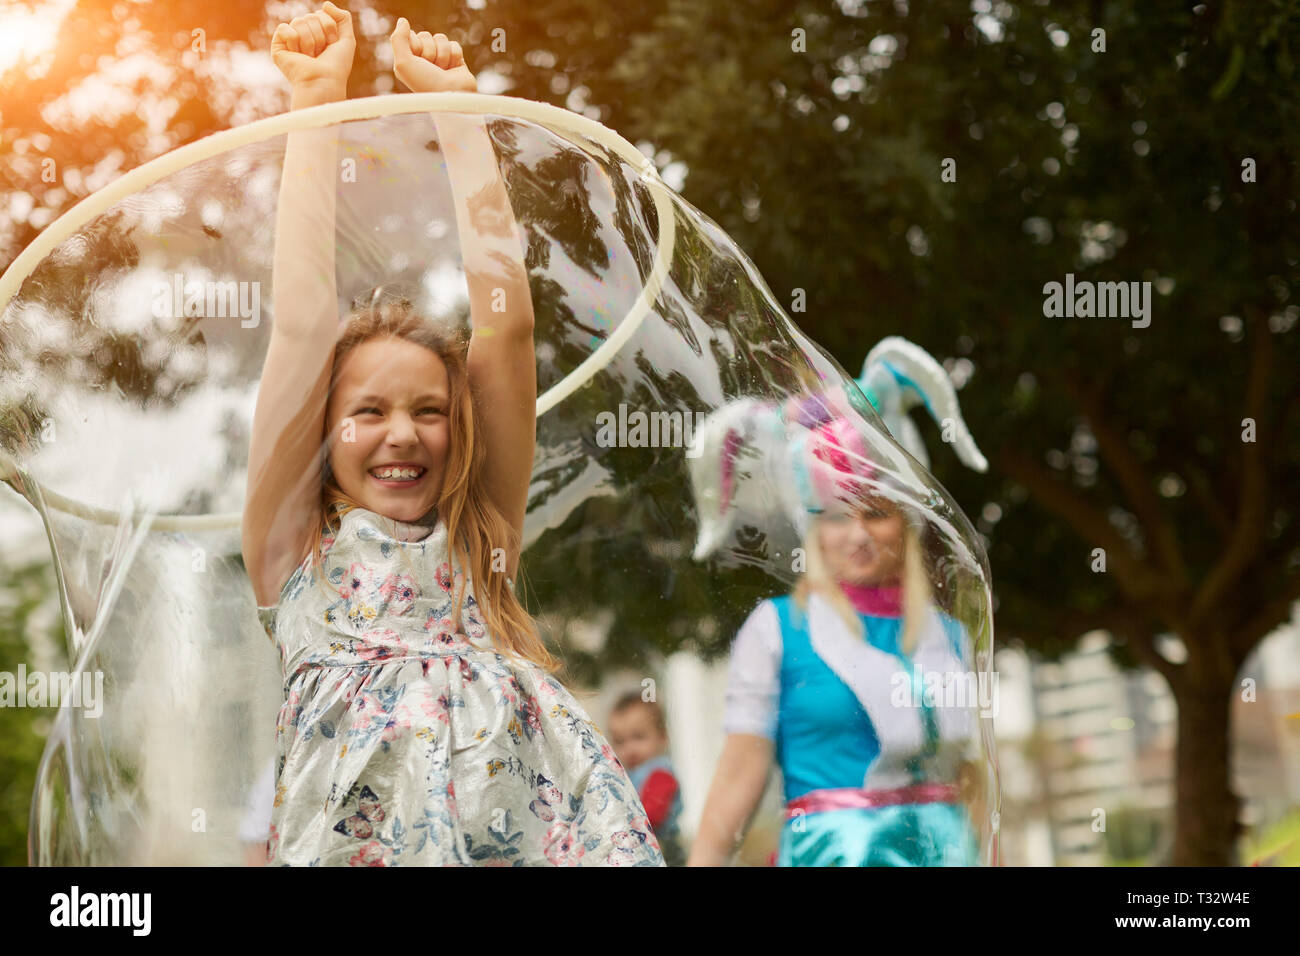 Lovely girl holding hands up and smiling while standing inside a large bubble during the festival on a sunny day in the park Stock Photo